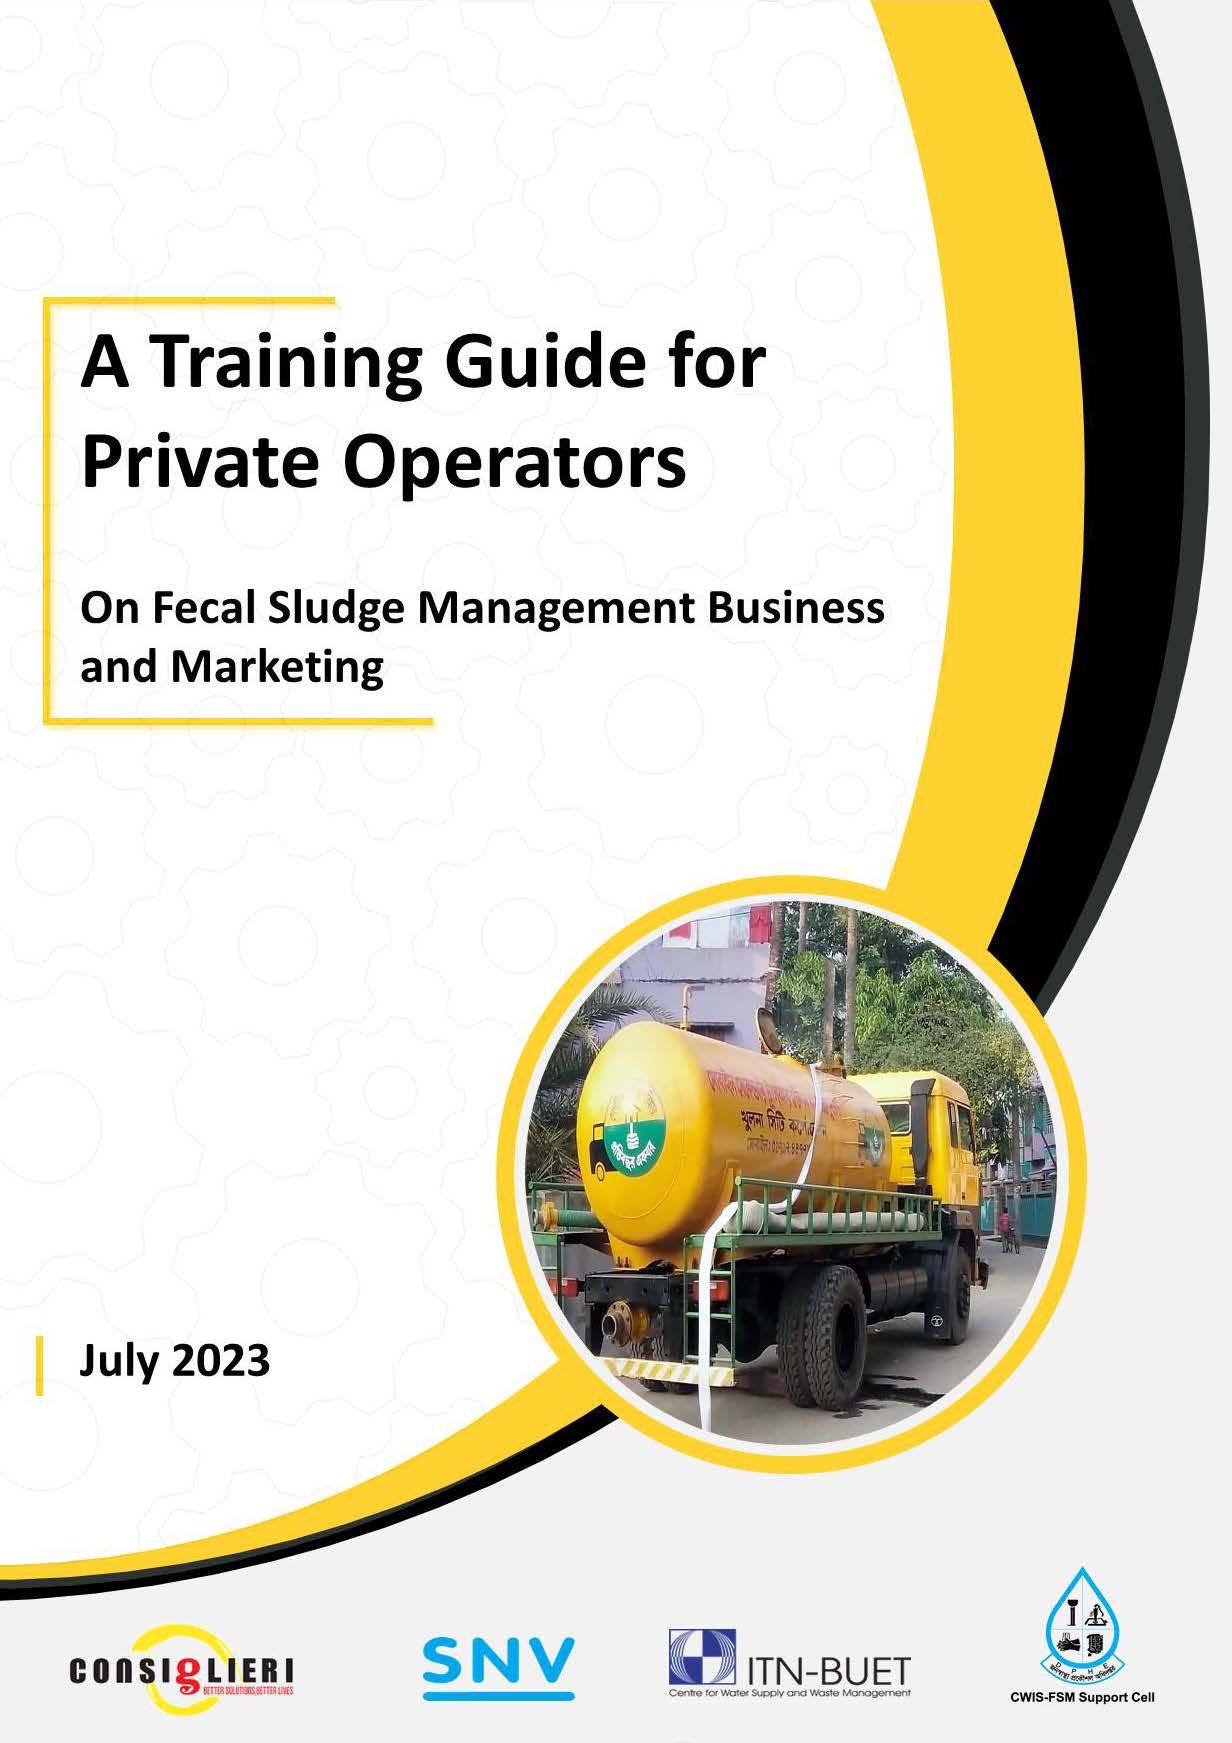 Training Guide for Private Operators on Fecal Sludge Management Business and Marketing